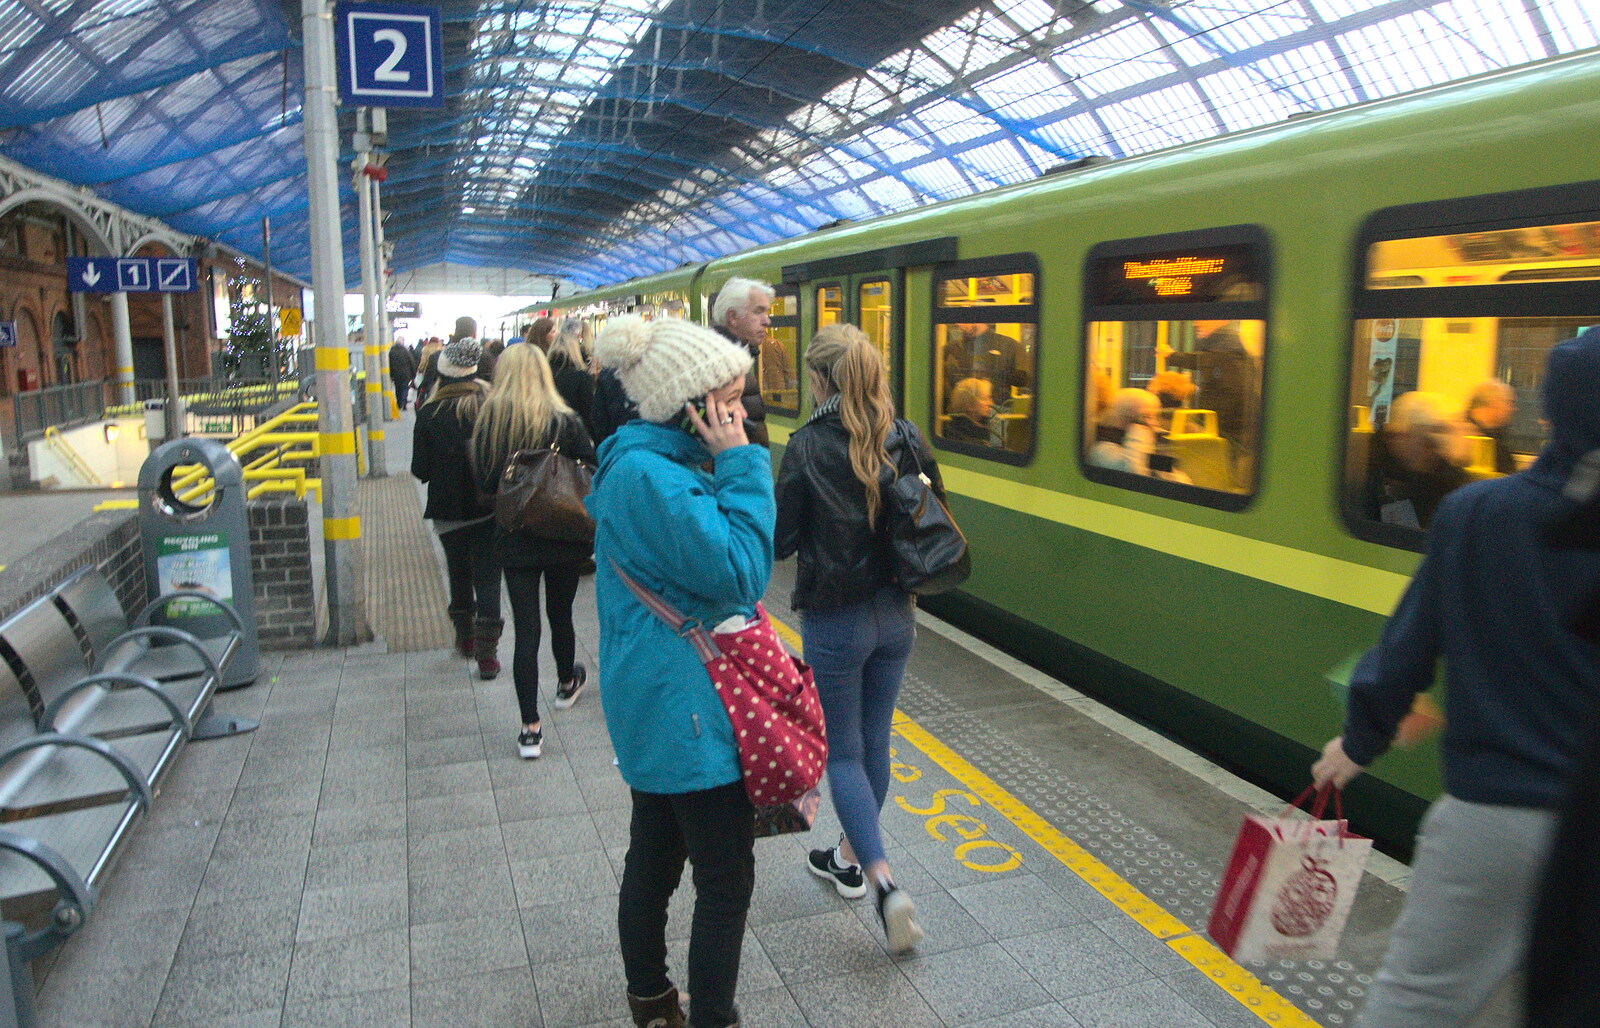 The DART train comes in from Christmas Eve in Dublin and Blackrock, Ireland - 24th December 2015